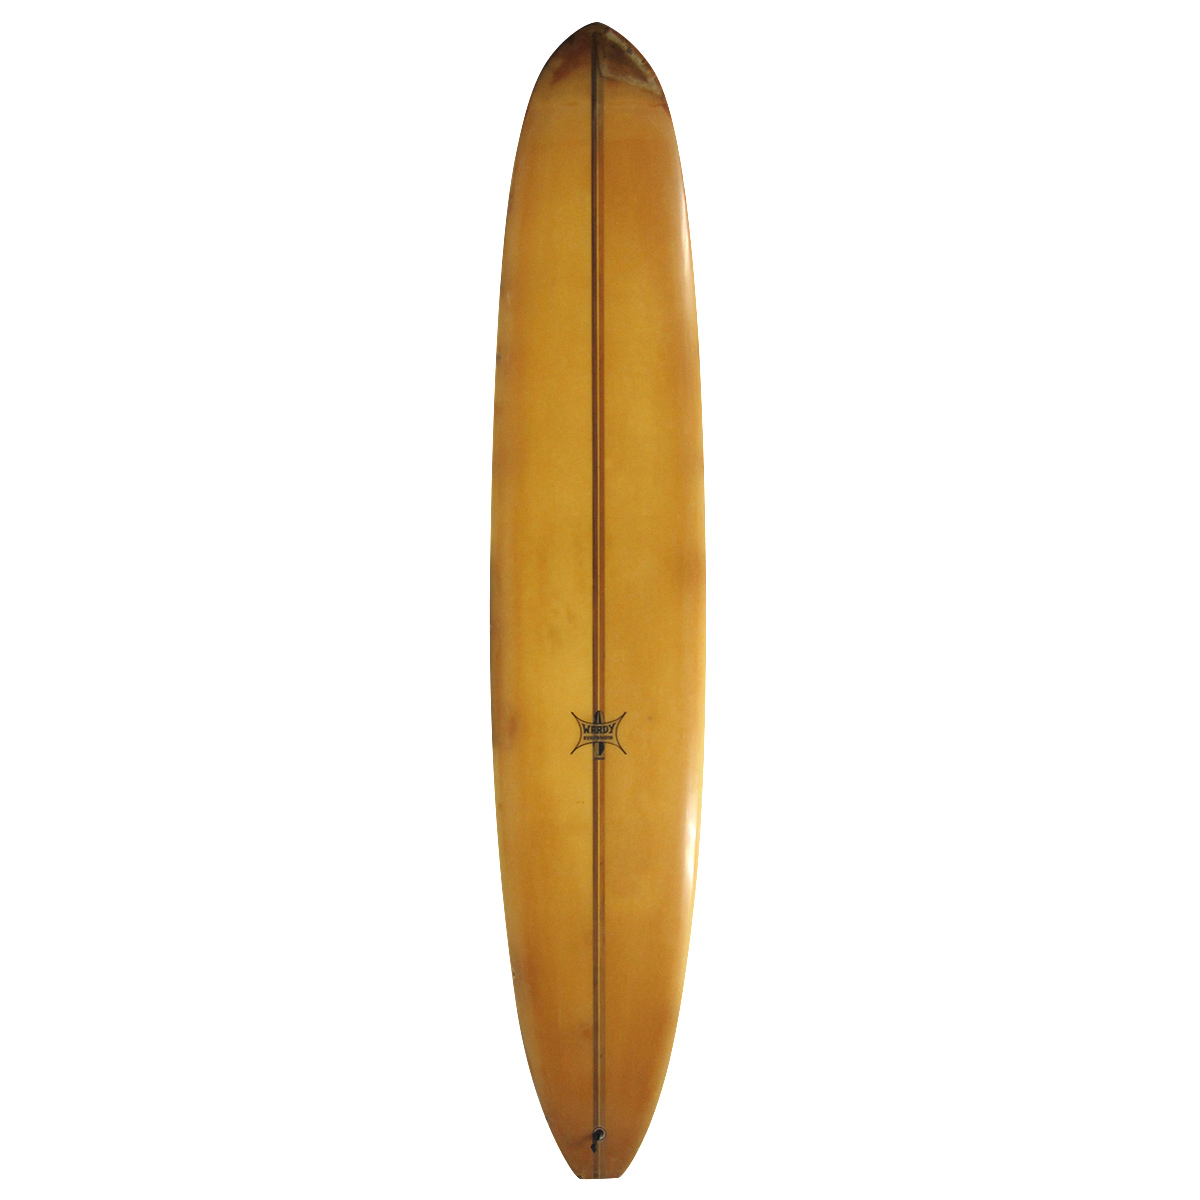  / Wardy Surfboards / 60`S PIG